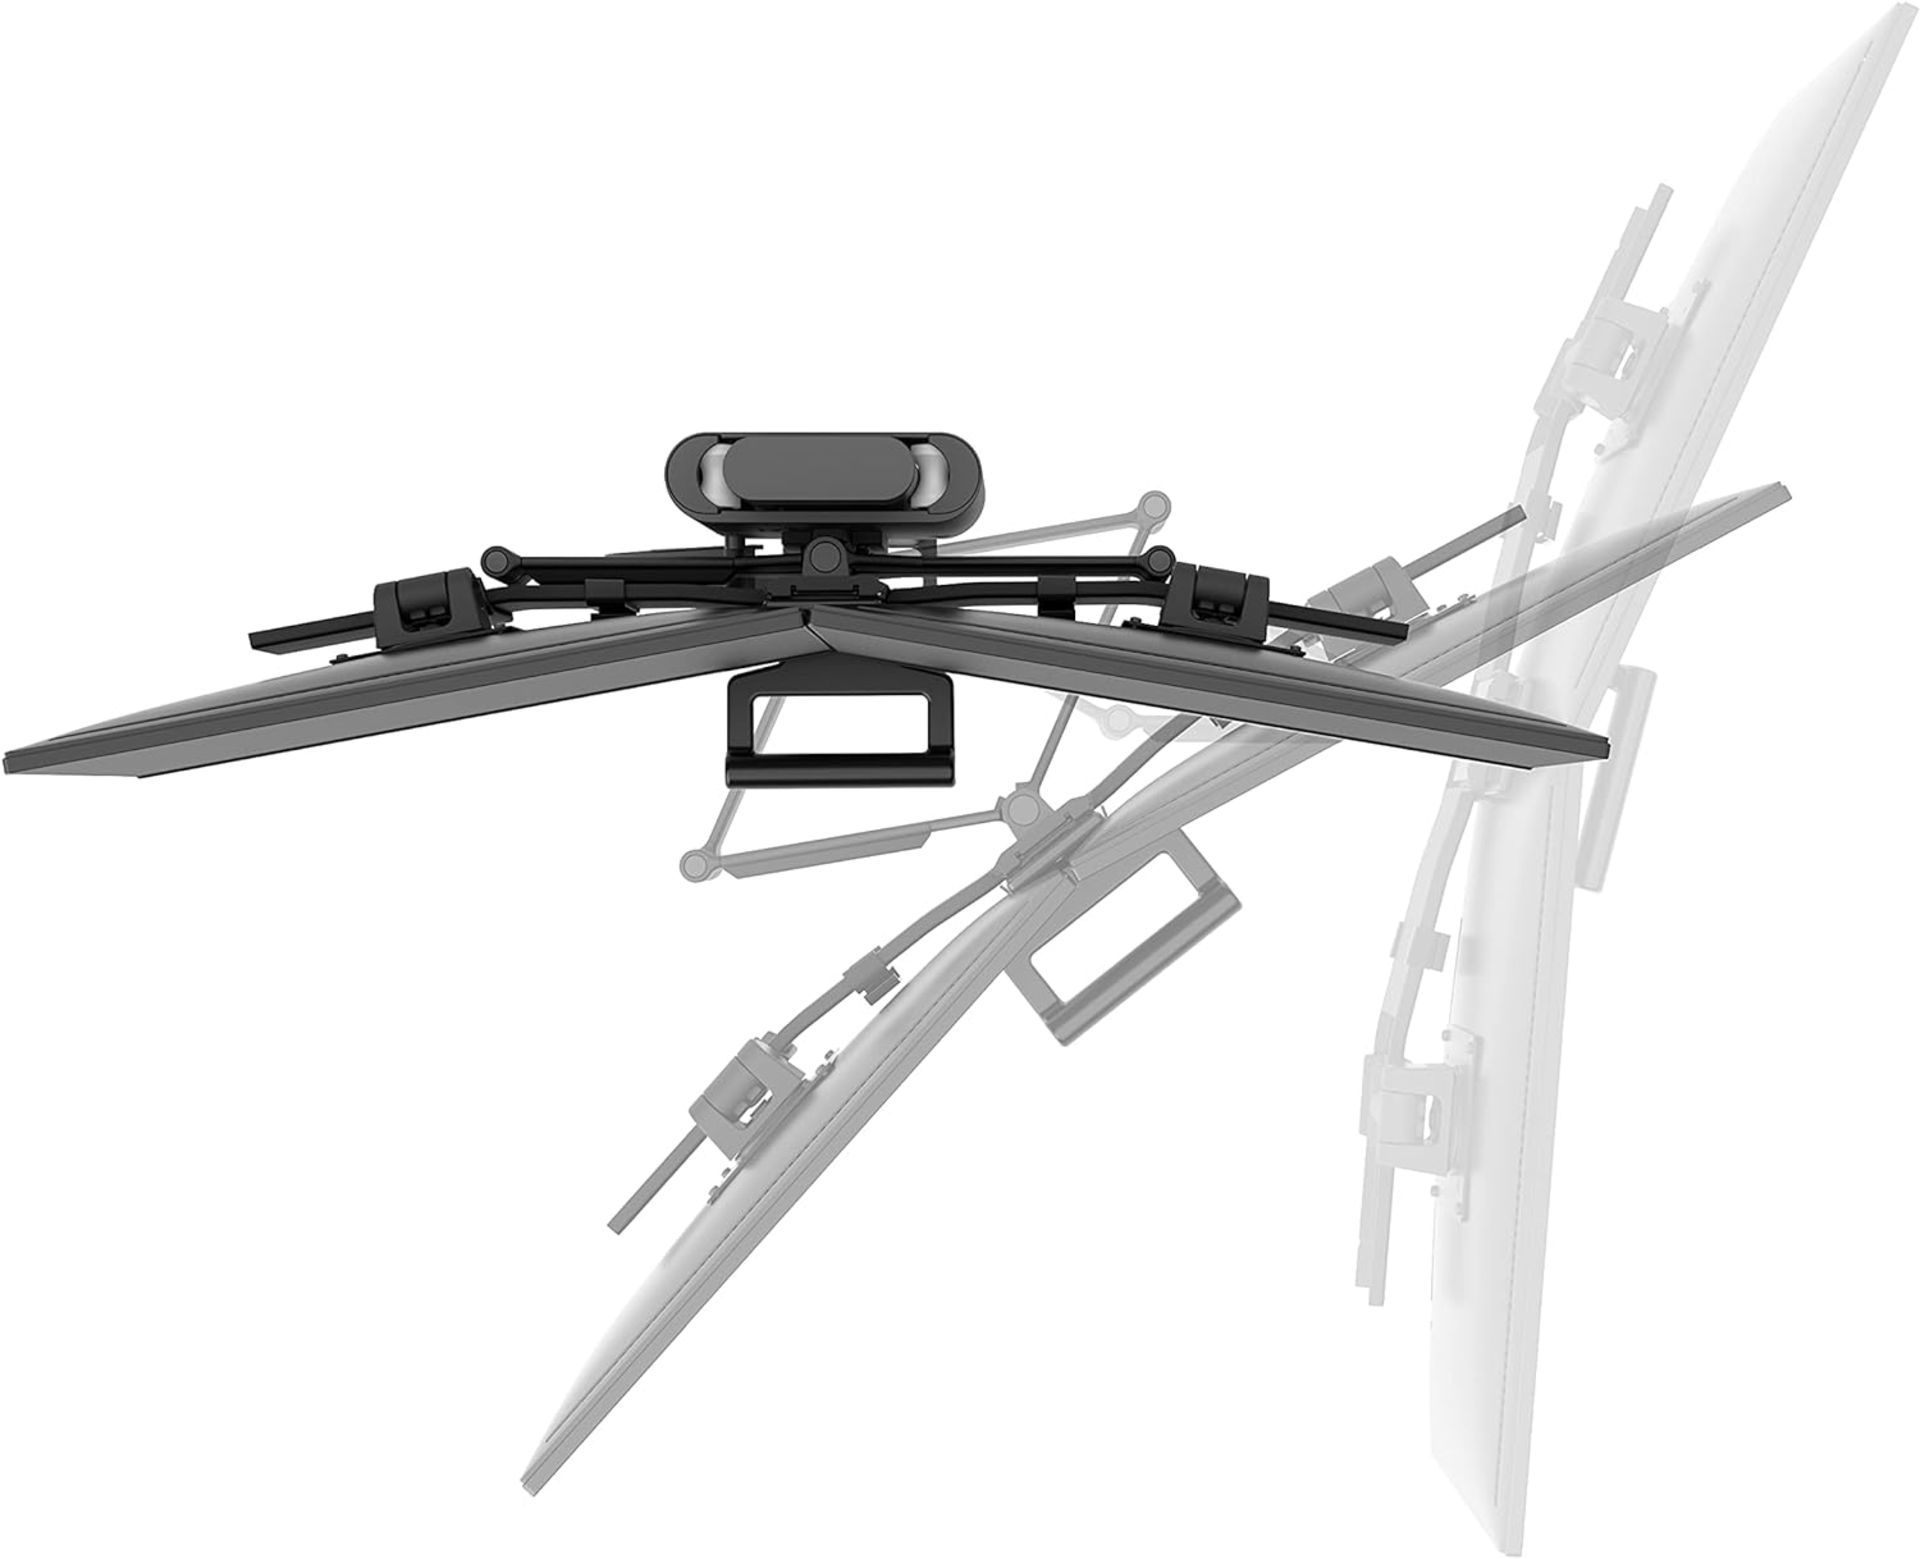 NEW & BOXED ERGOTRON Trace Dual Monitor Arm, VESA Desk Mount. RRP £417. (PCK5). for 2 Monitors Up to - Image 3 of 8